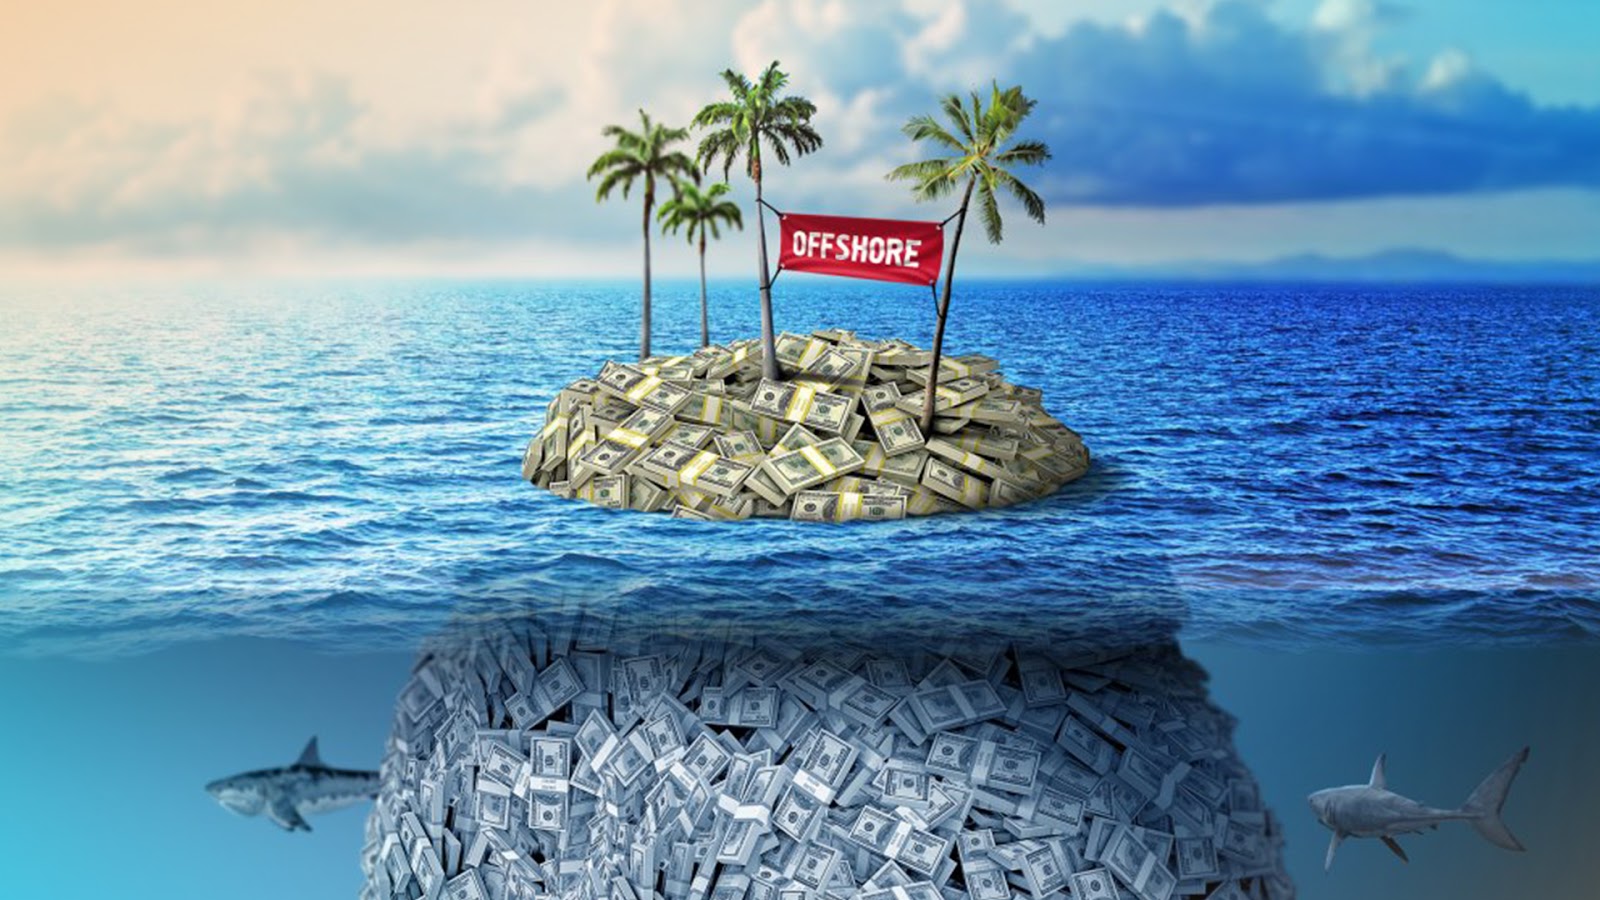 offshore companies are